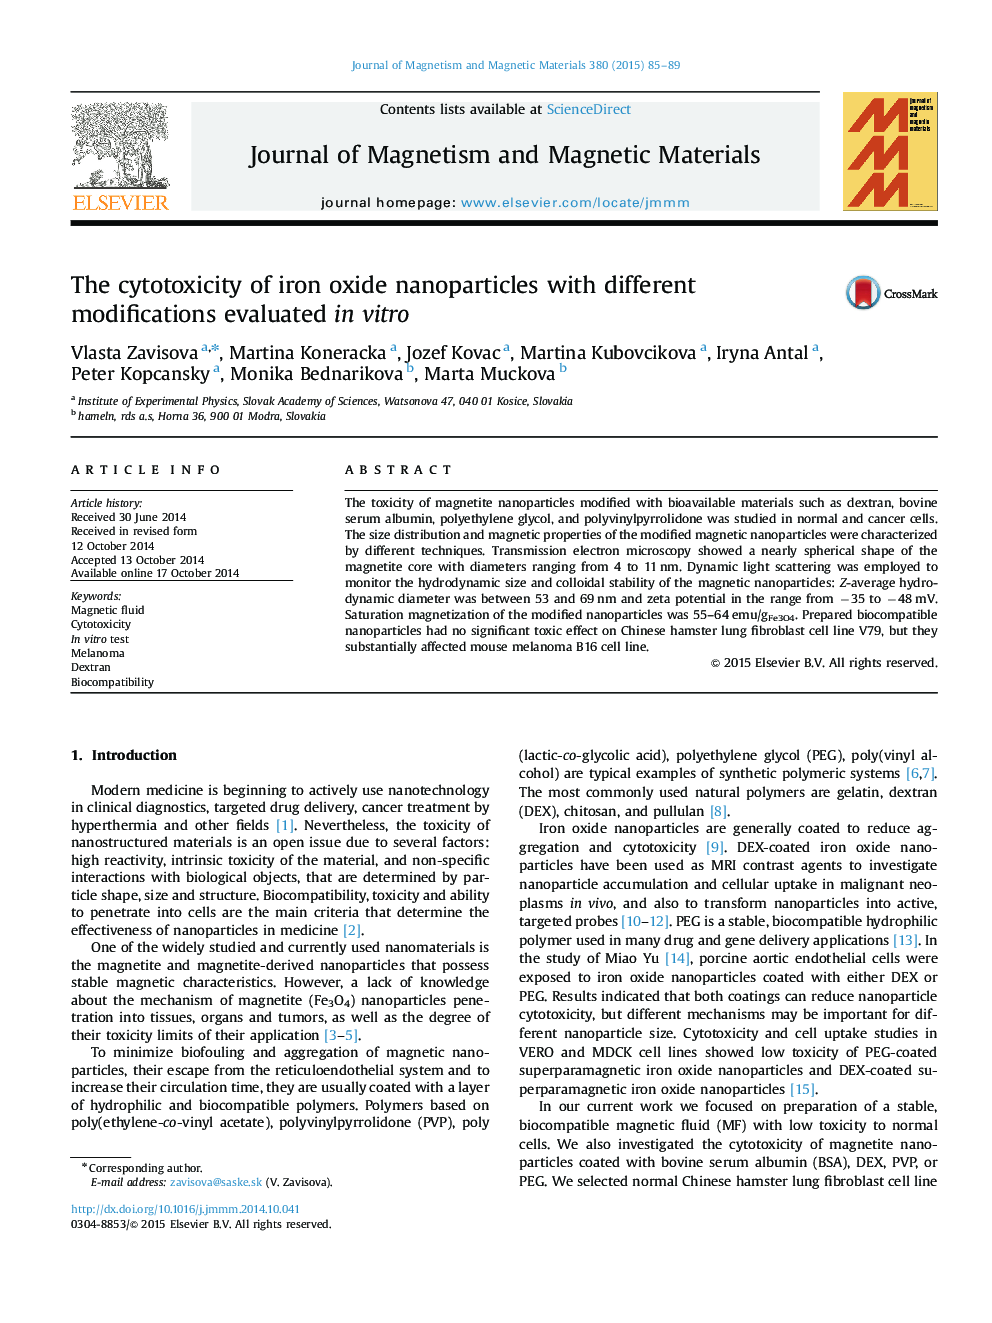 The cytotoxicity of iron oxide nanoparticles with different modifications evaluated in vitro